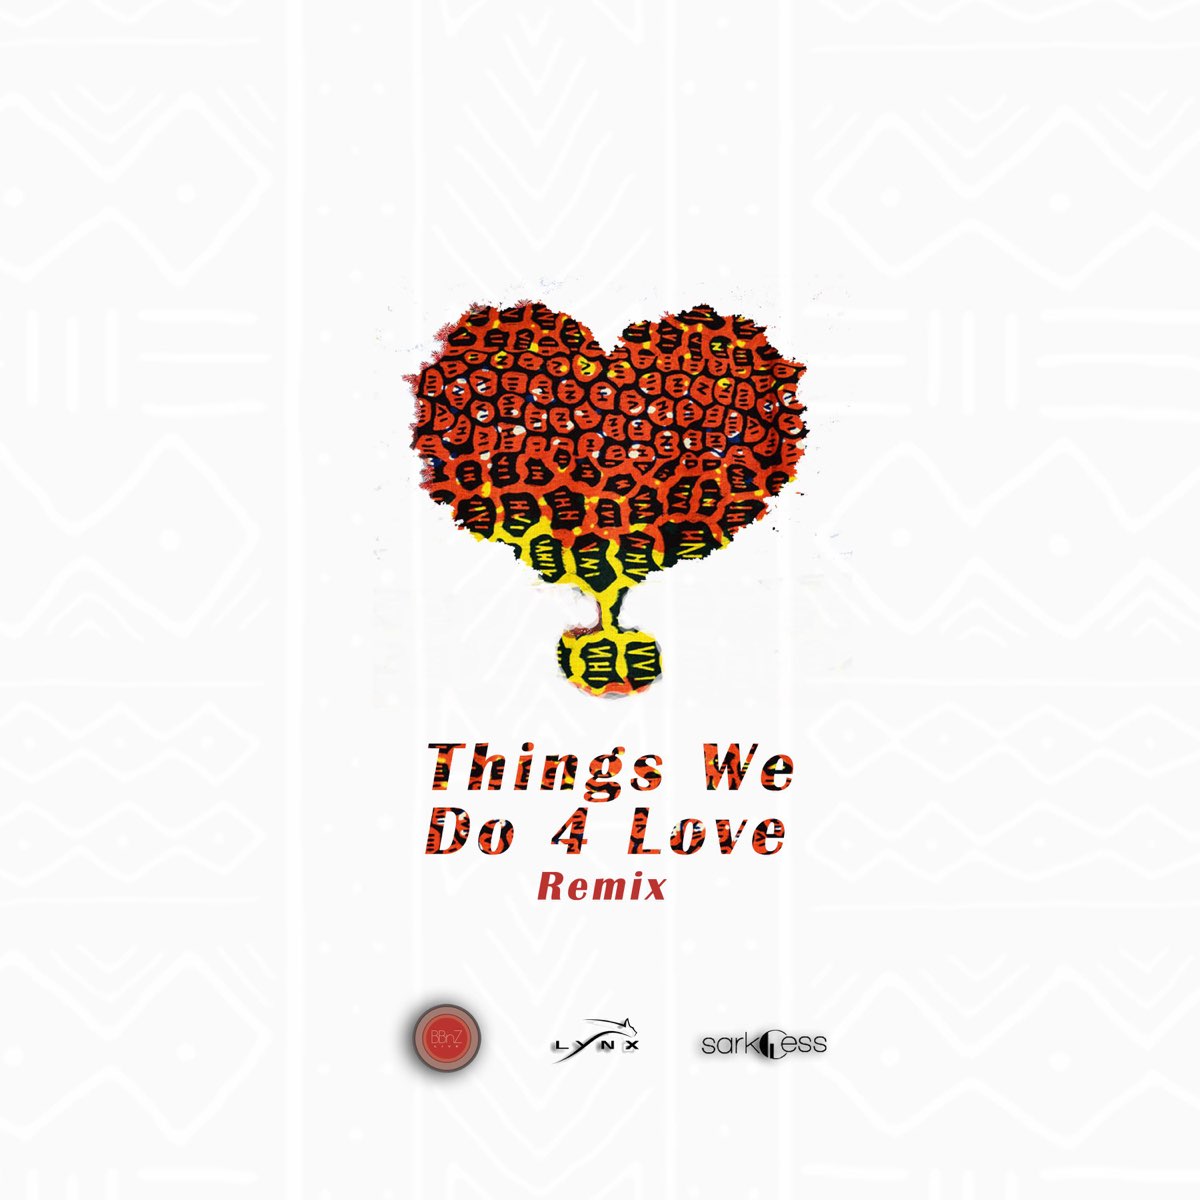 Give love remix. Love Remix. Jazzamor / things we do for Love обложка. Love things. The Sounds things we do for Love.